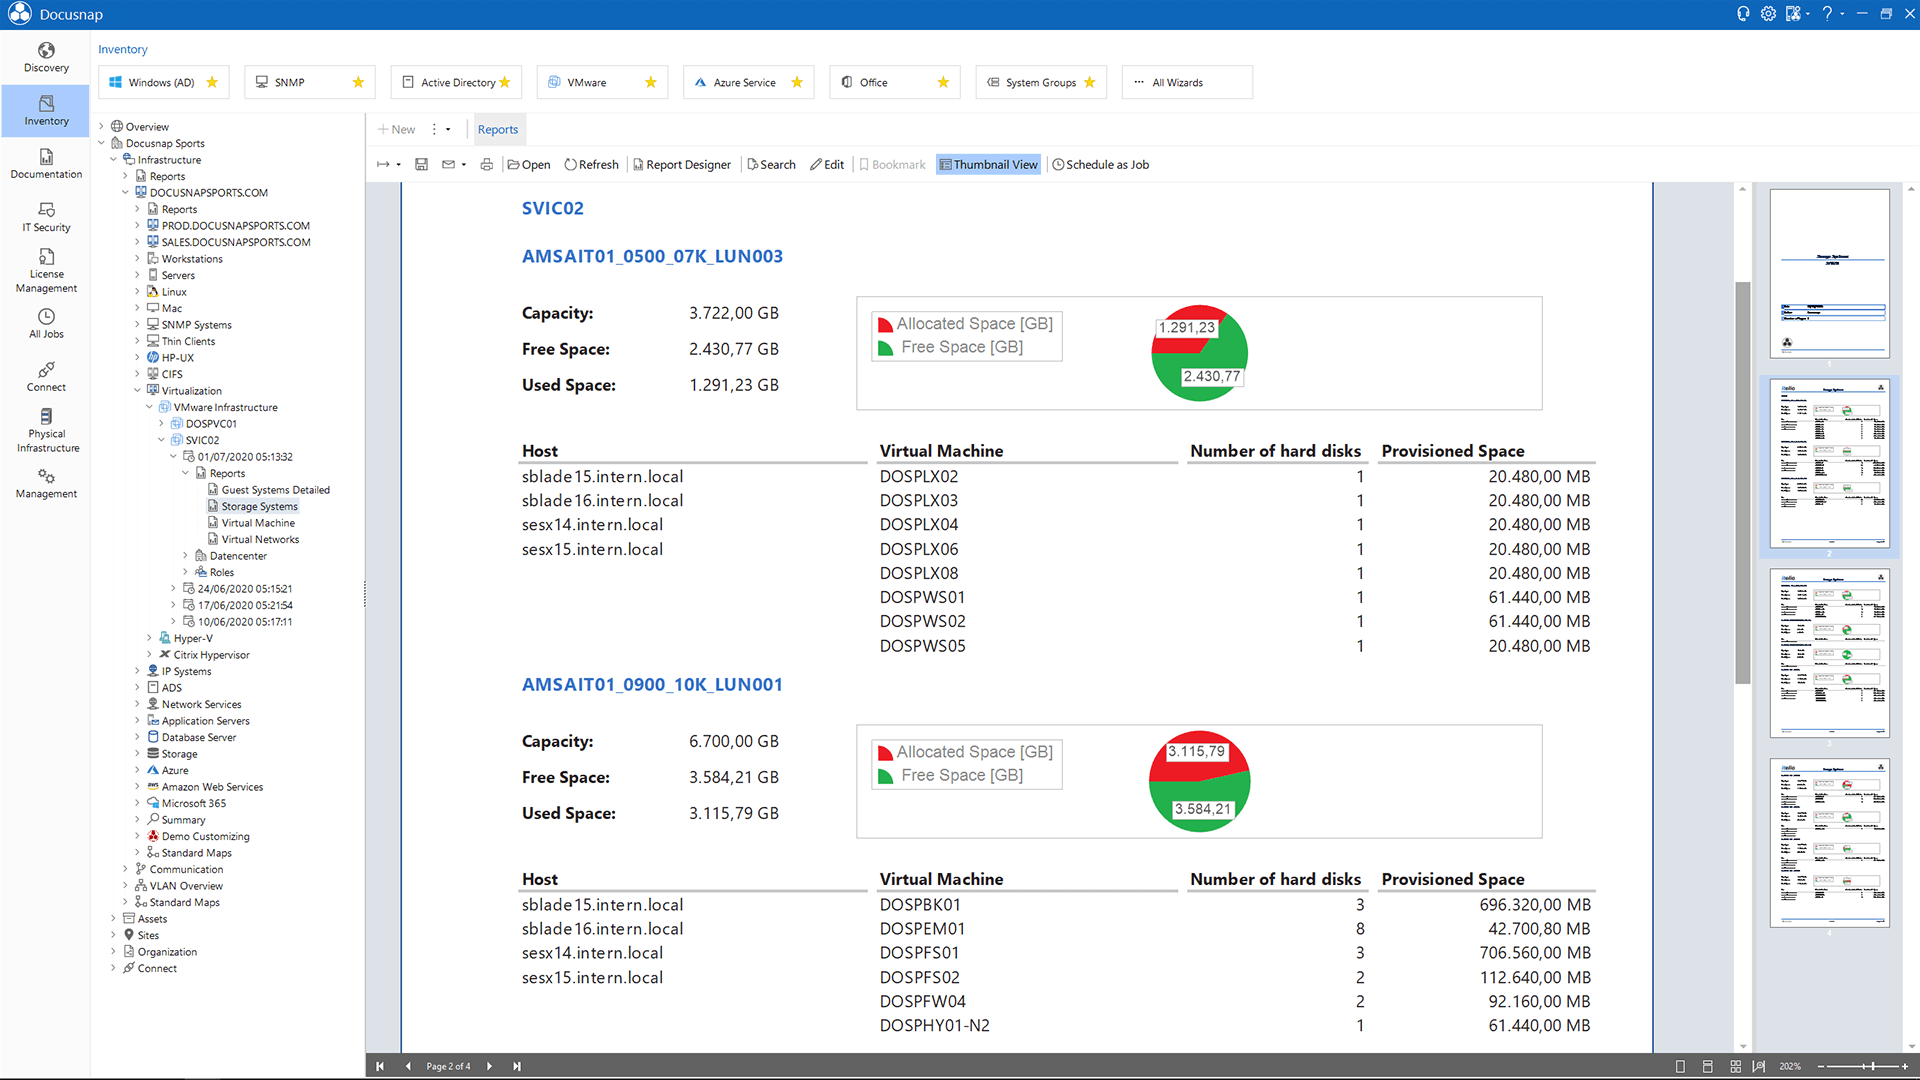 Screenshot: Evaluation of the data store usage of virtual machines on ESX hosts